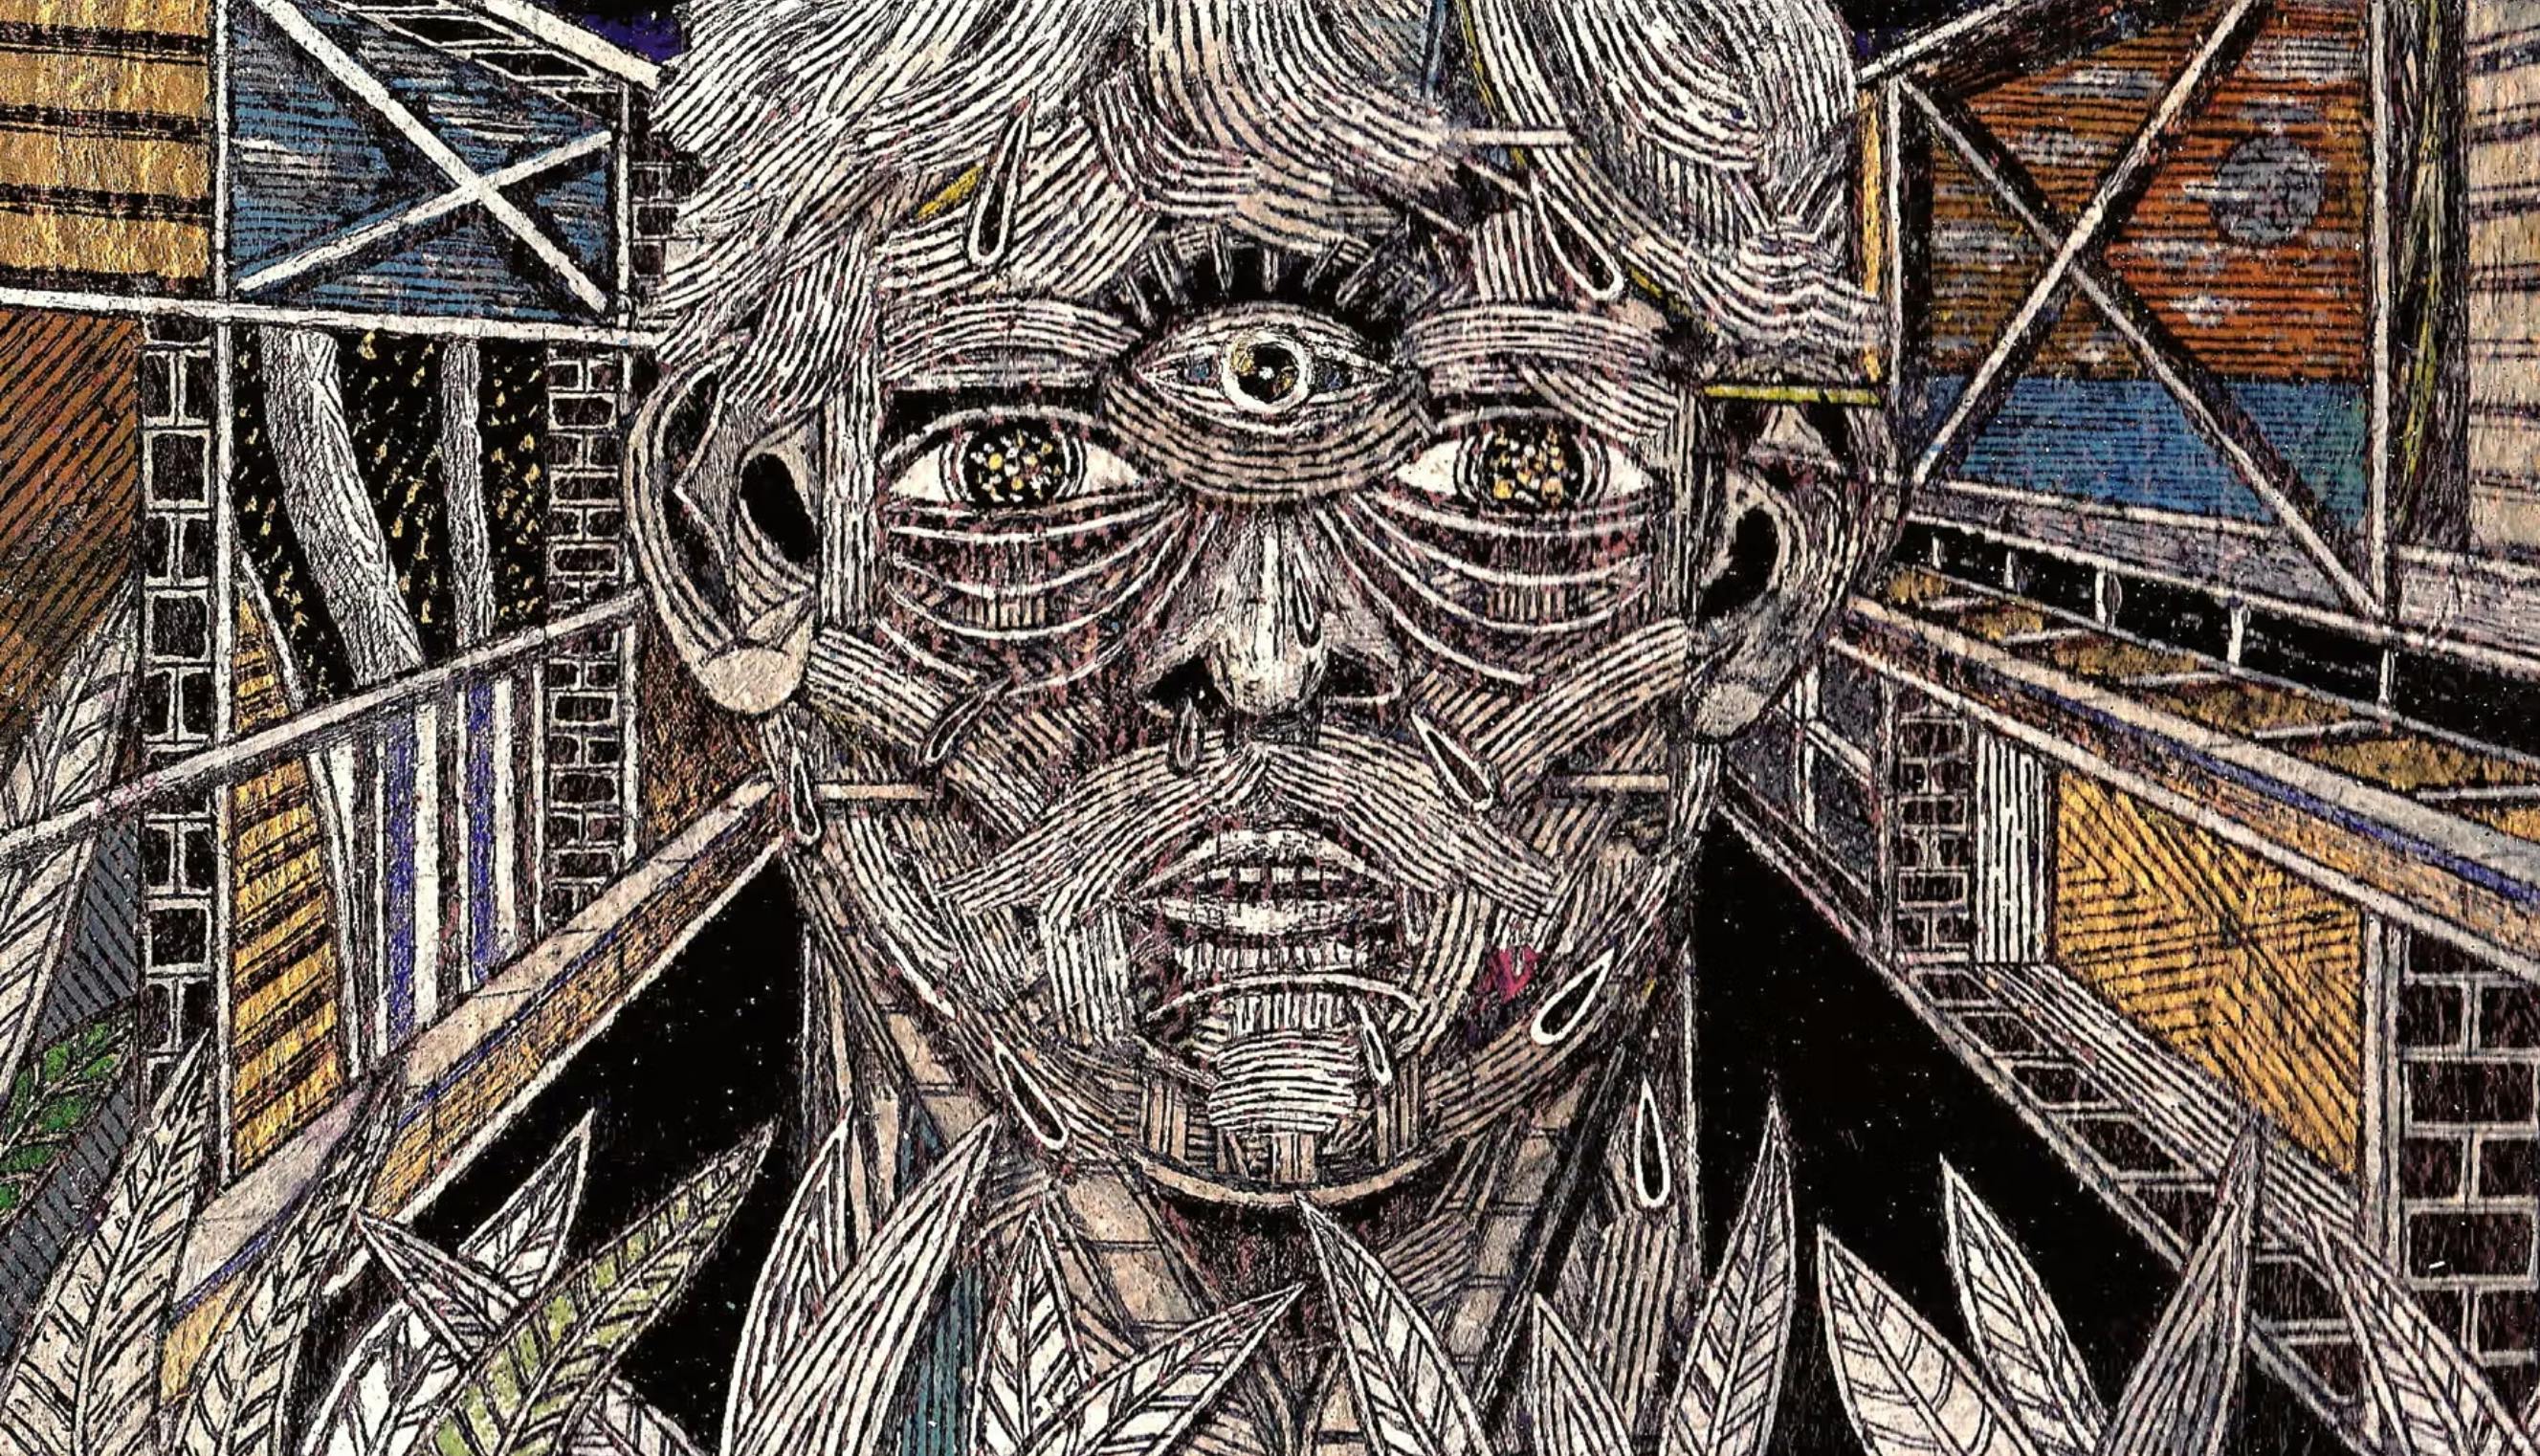 Detailed illustration of a face with three eyes looking at the camera. In the background there are various walls and doors/windows. From Headspace by Jack Fried (2014)